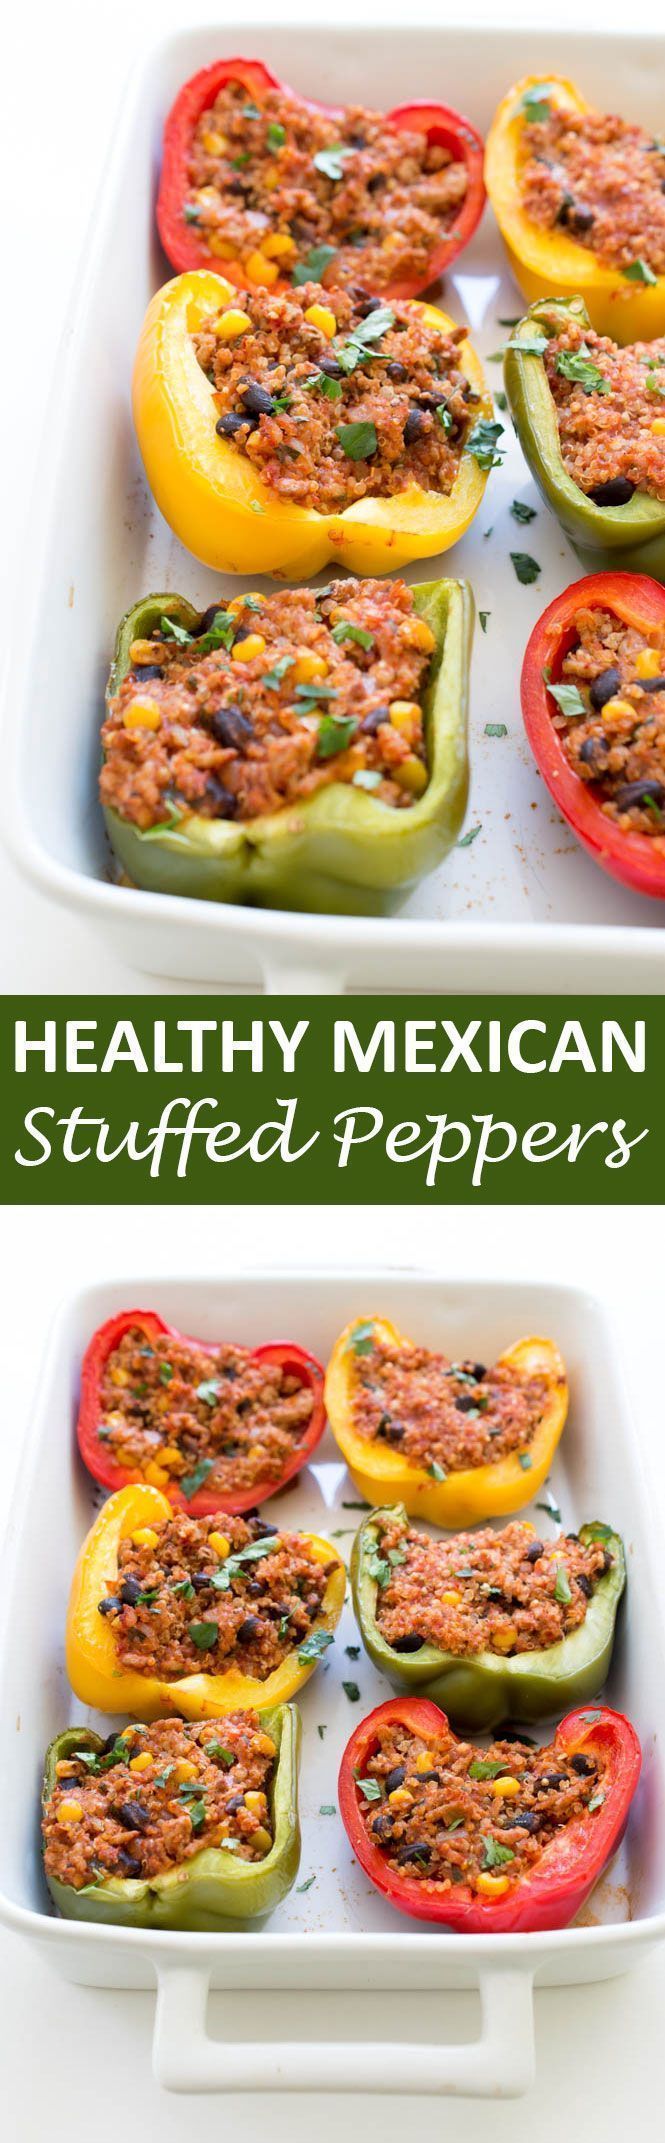 Healthy Mexican Quinoa and Turkey Stuffed Peppers. A quick, easy and healthy weeknight meal! | chefsavvy.com